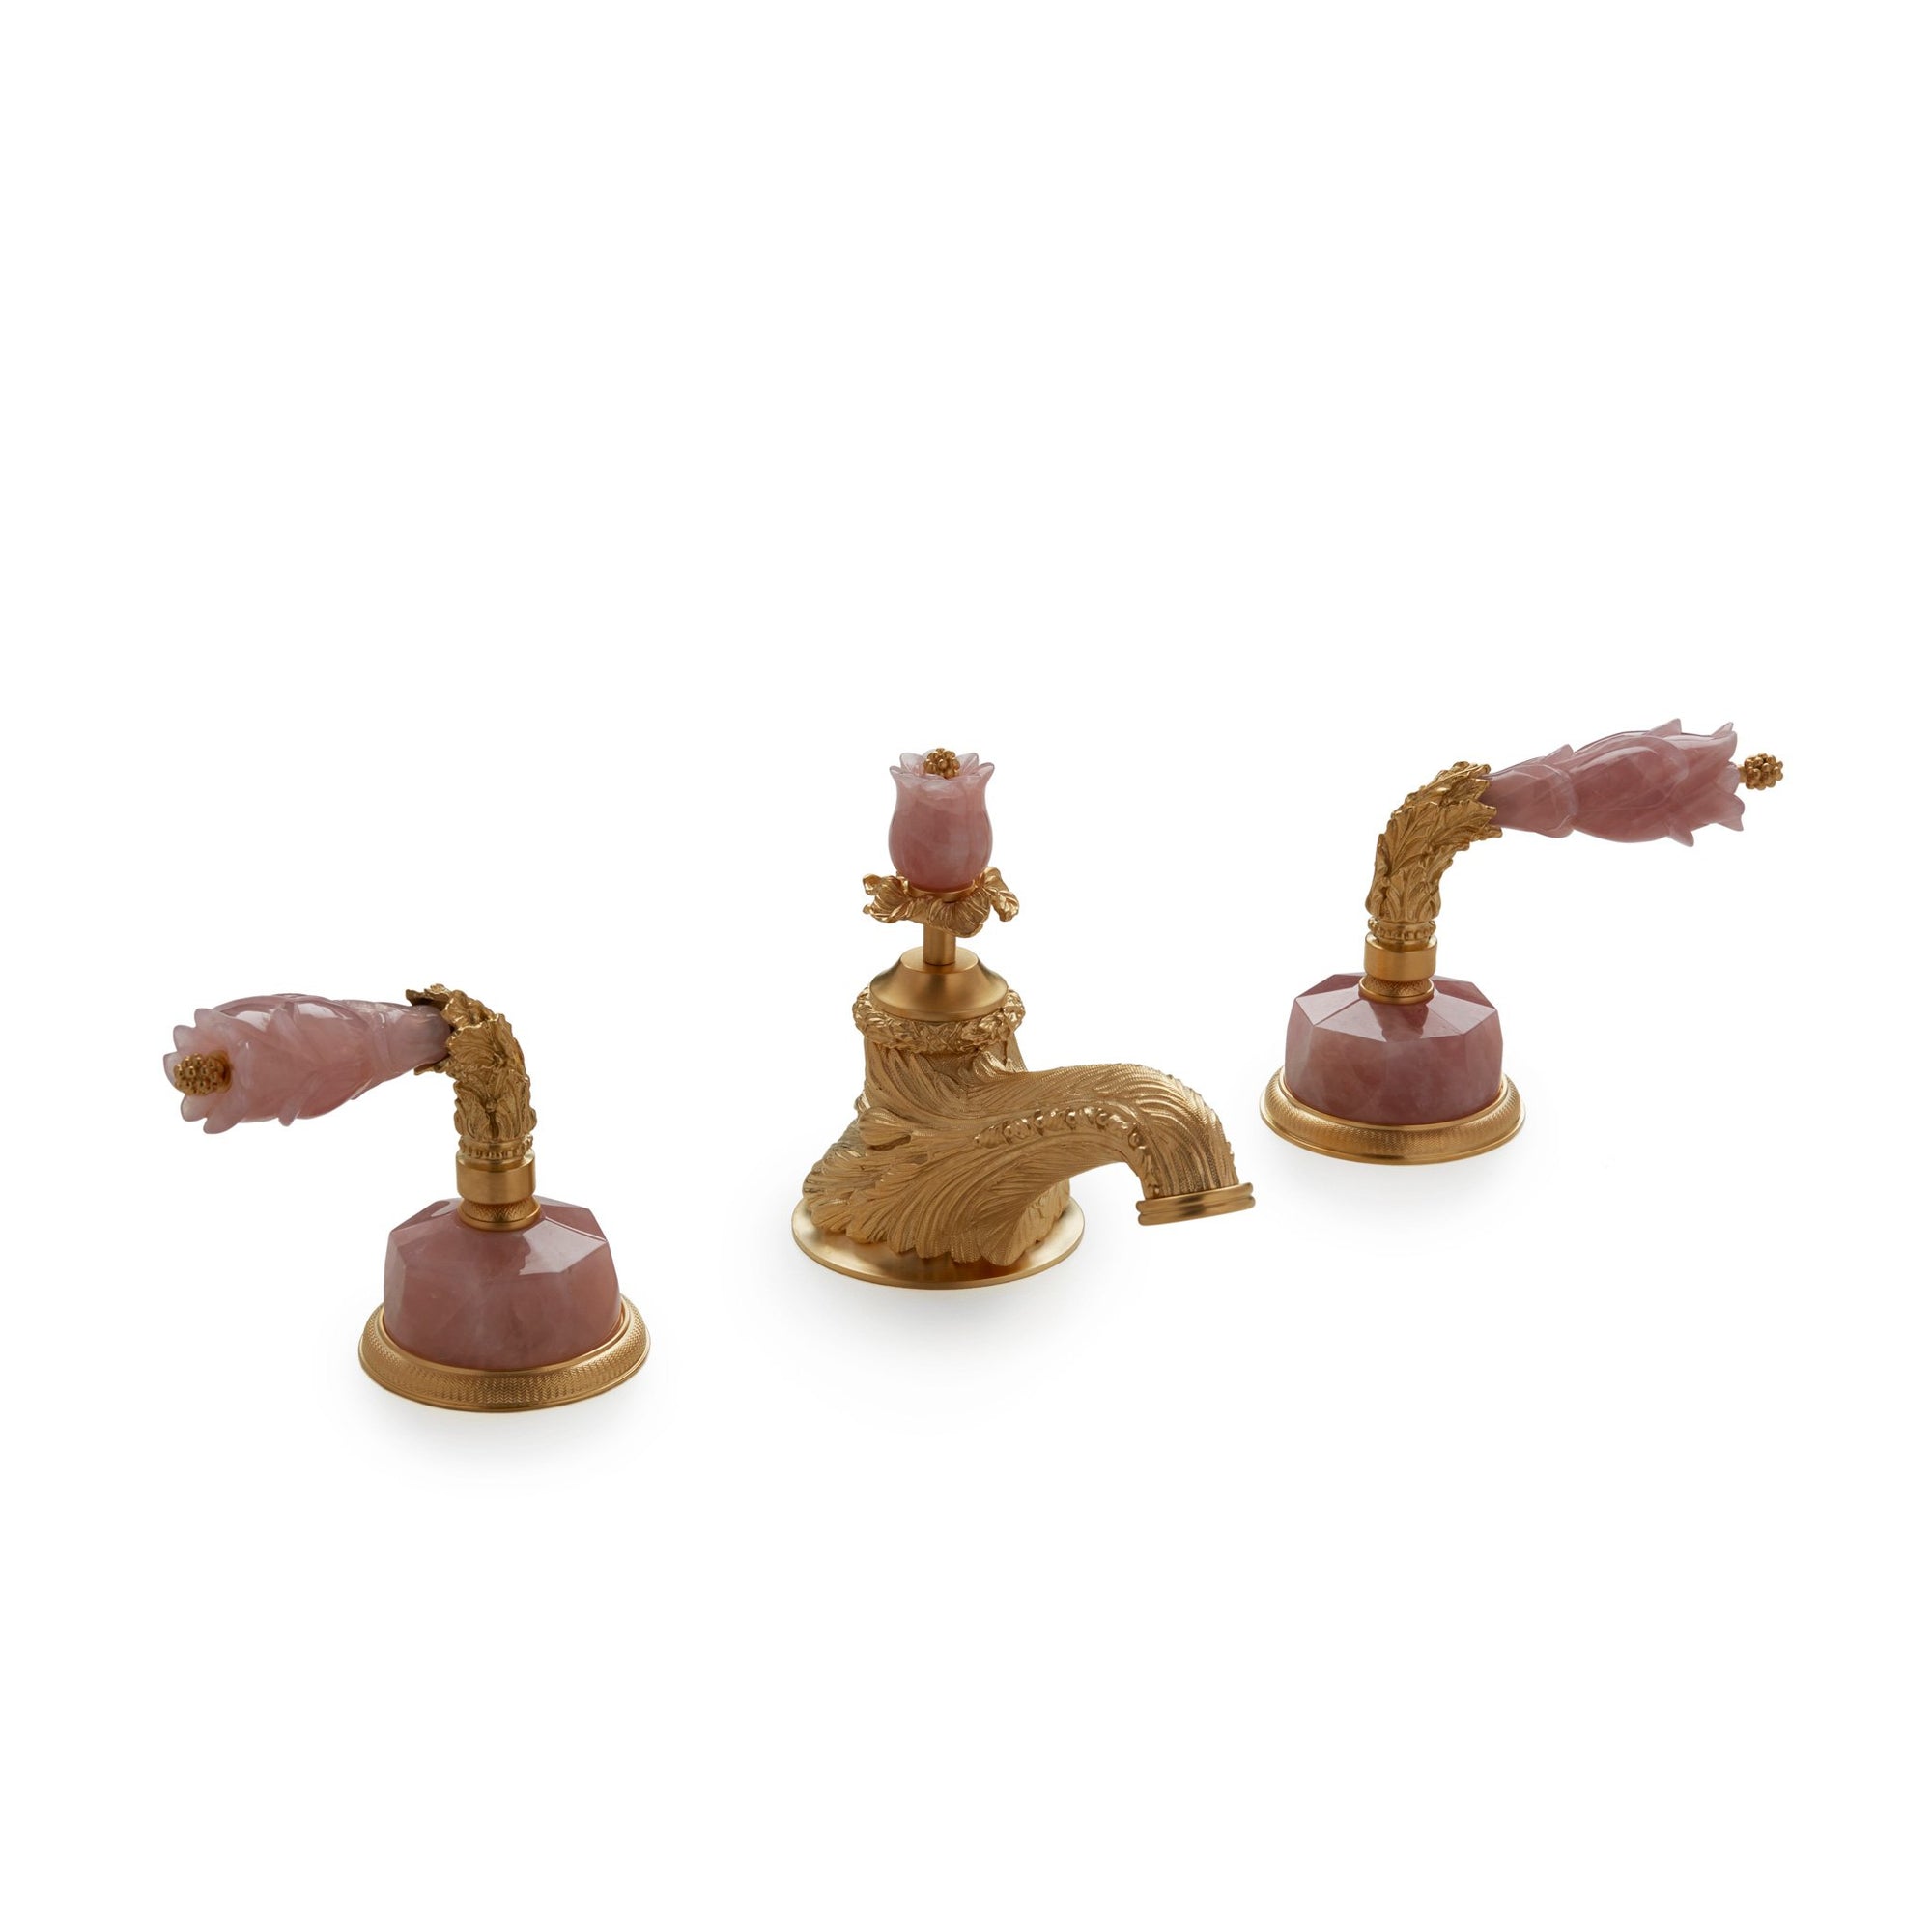 1040BSN819-RSQU-GP Sherle Wagner International Semiprecious Leaves Lever Faucet Set in Gold Plate metal finish with Rose Quartz inserts